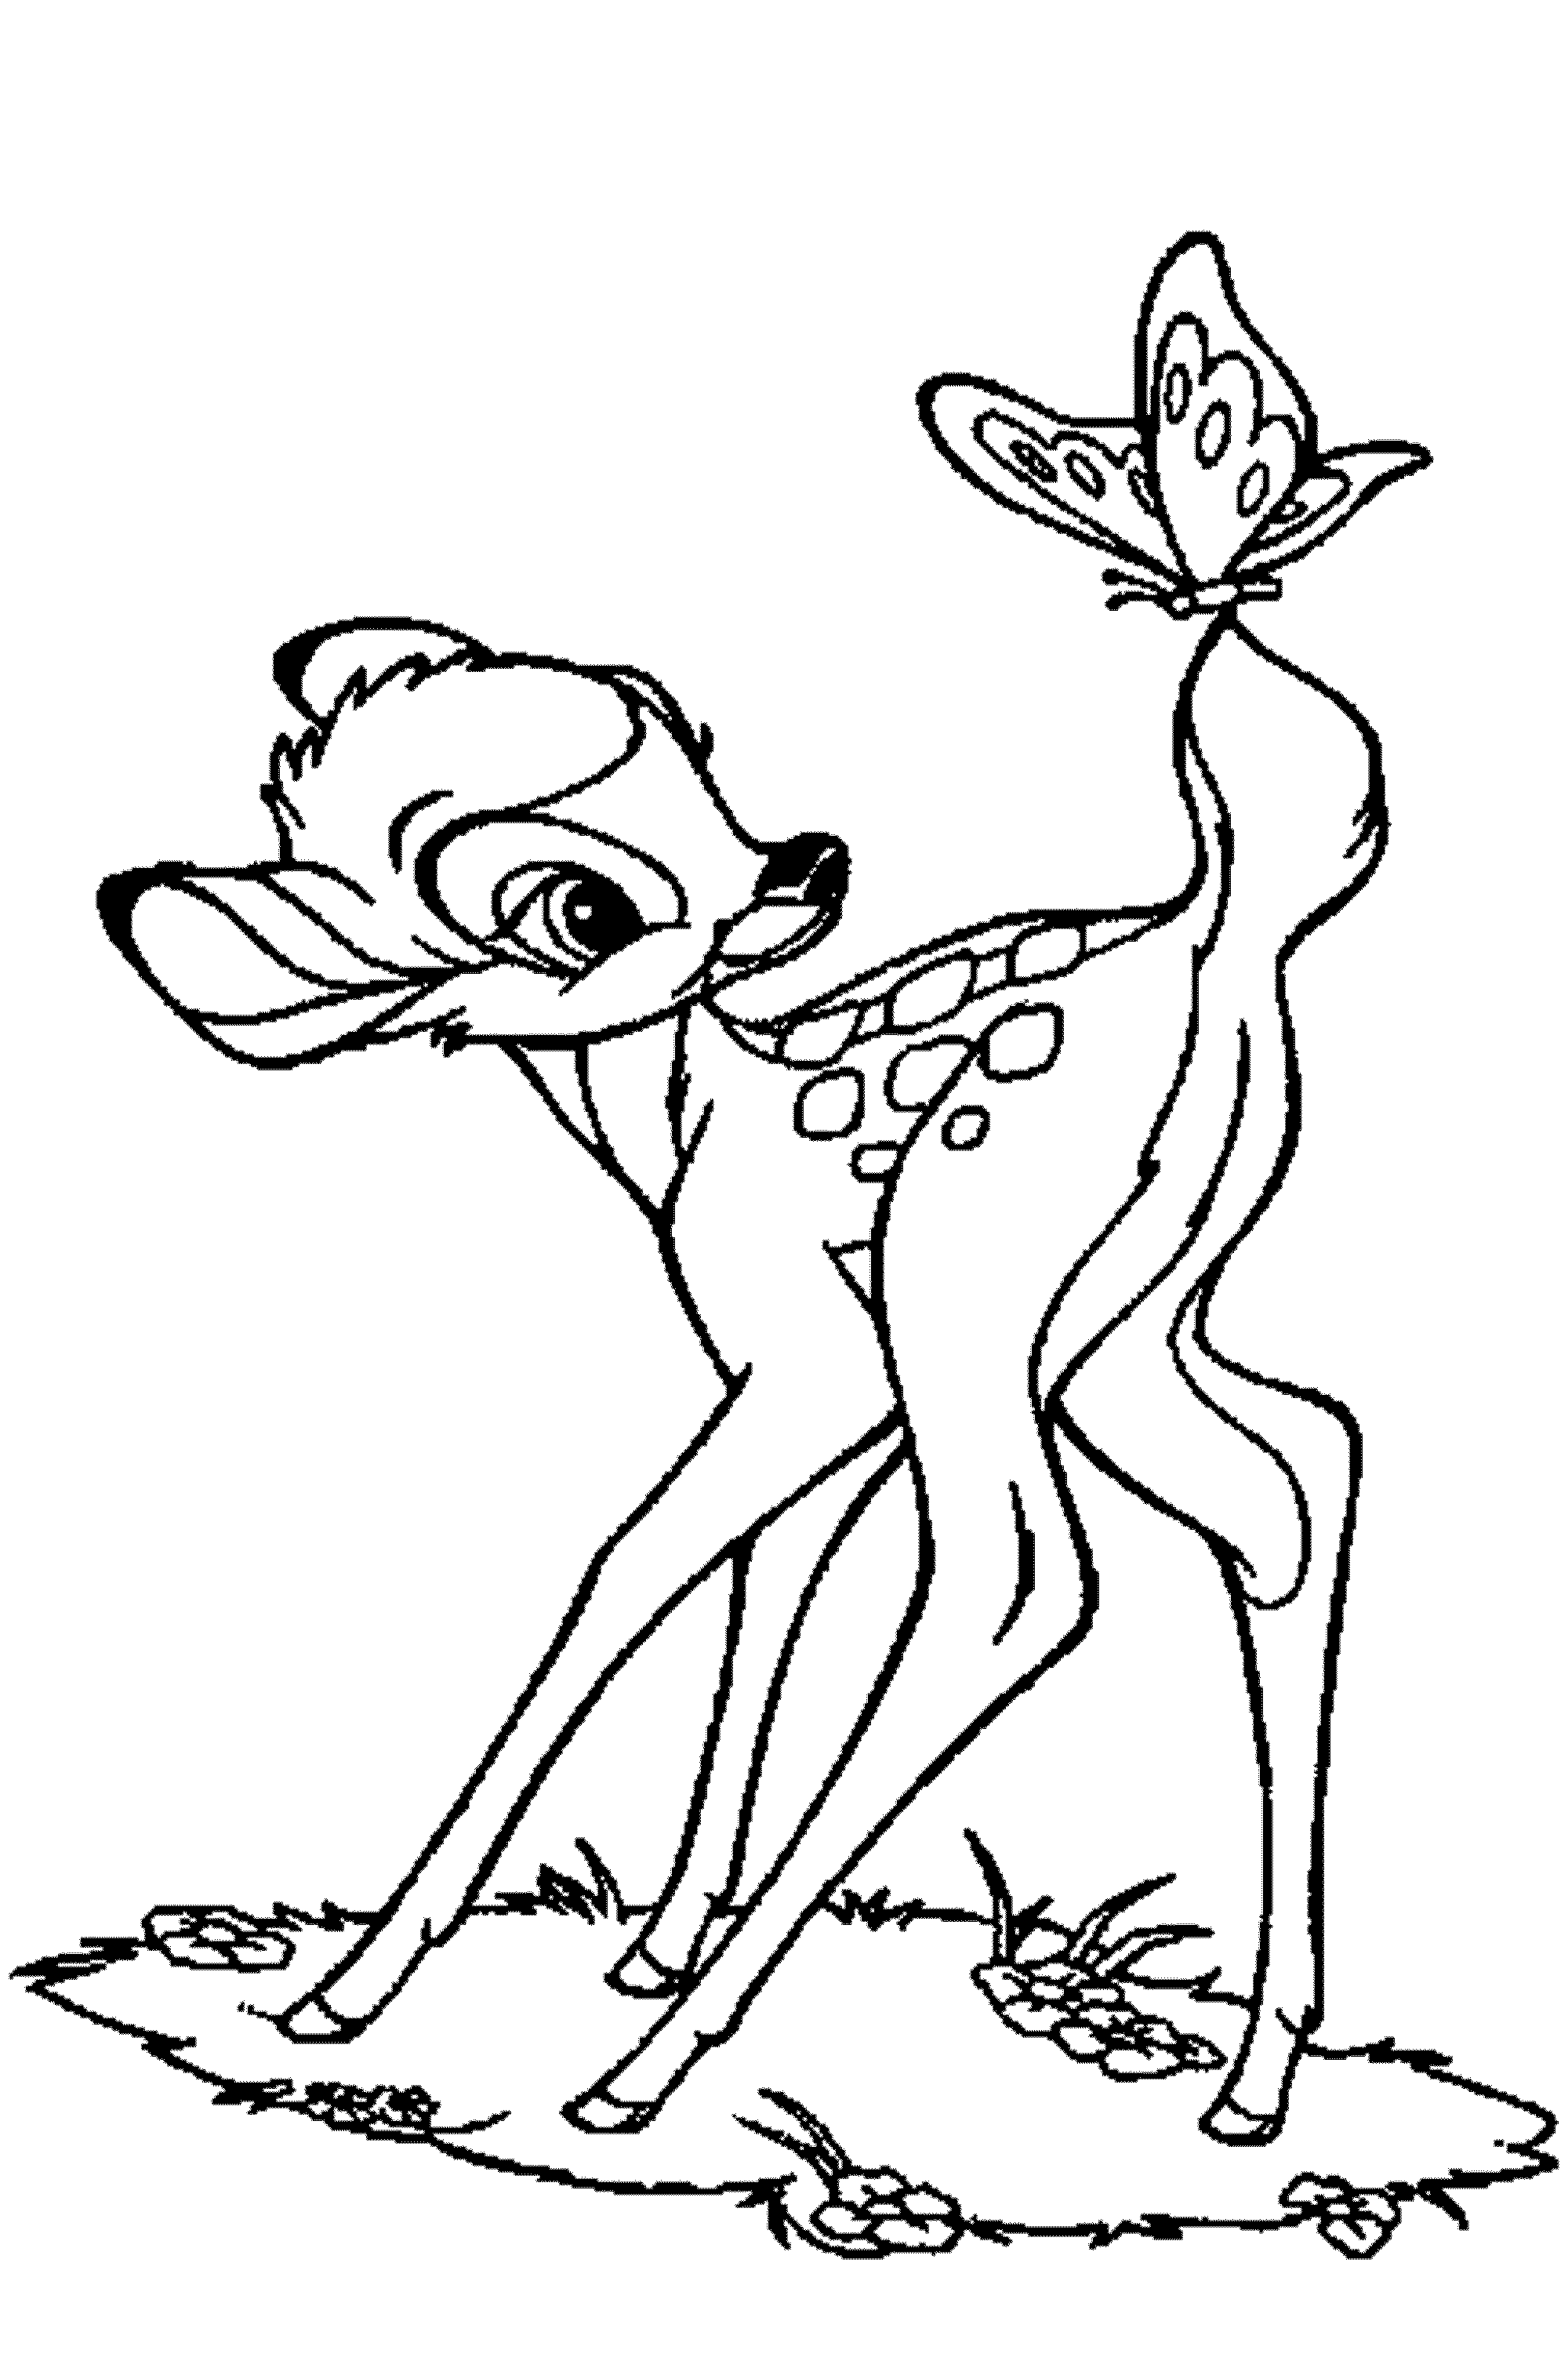 7 Pics of Cute Deer Coloring Pages - Cute Reindeer Coloring Pages ...